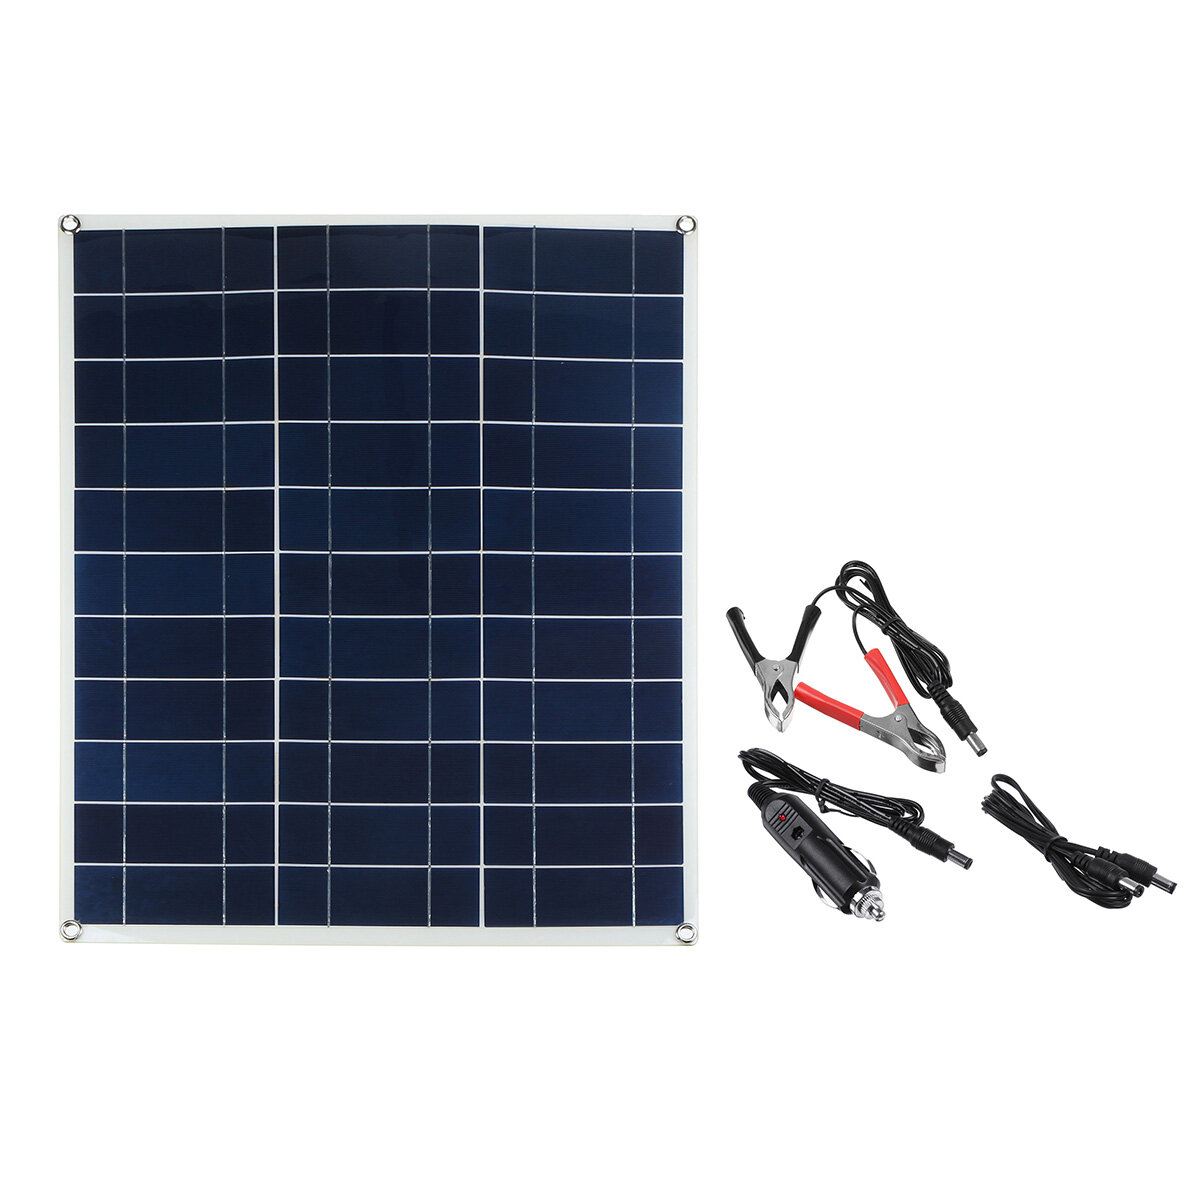 50W 18VDC 60x50cm Polycrystalline Flexible Light Solar Panel with Charging Cable+Alligator Clip